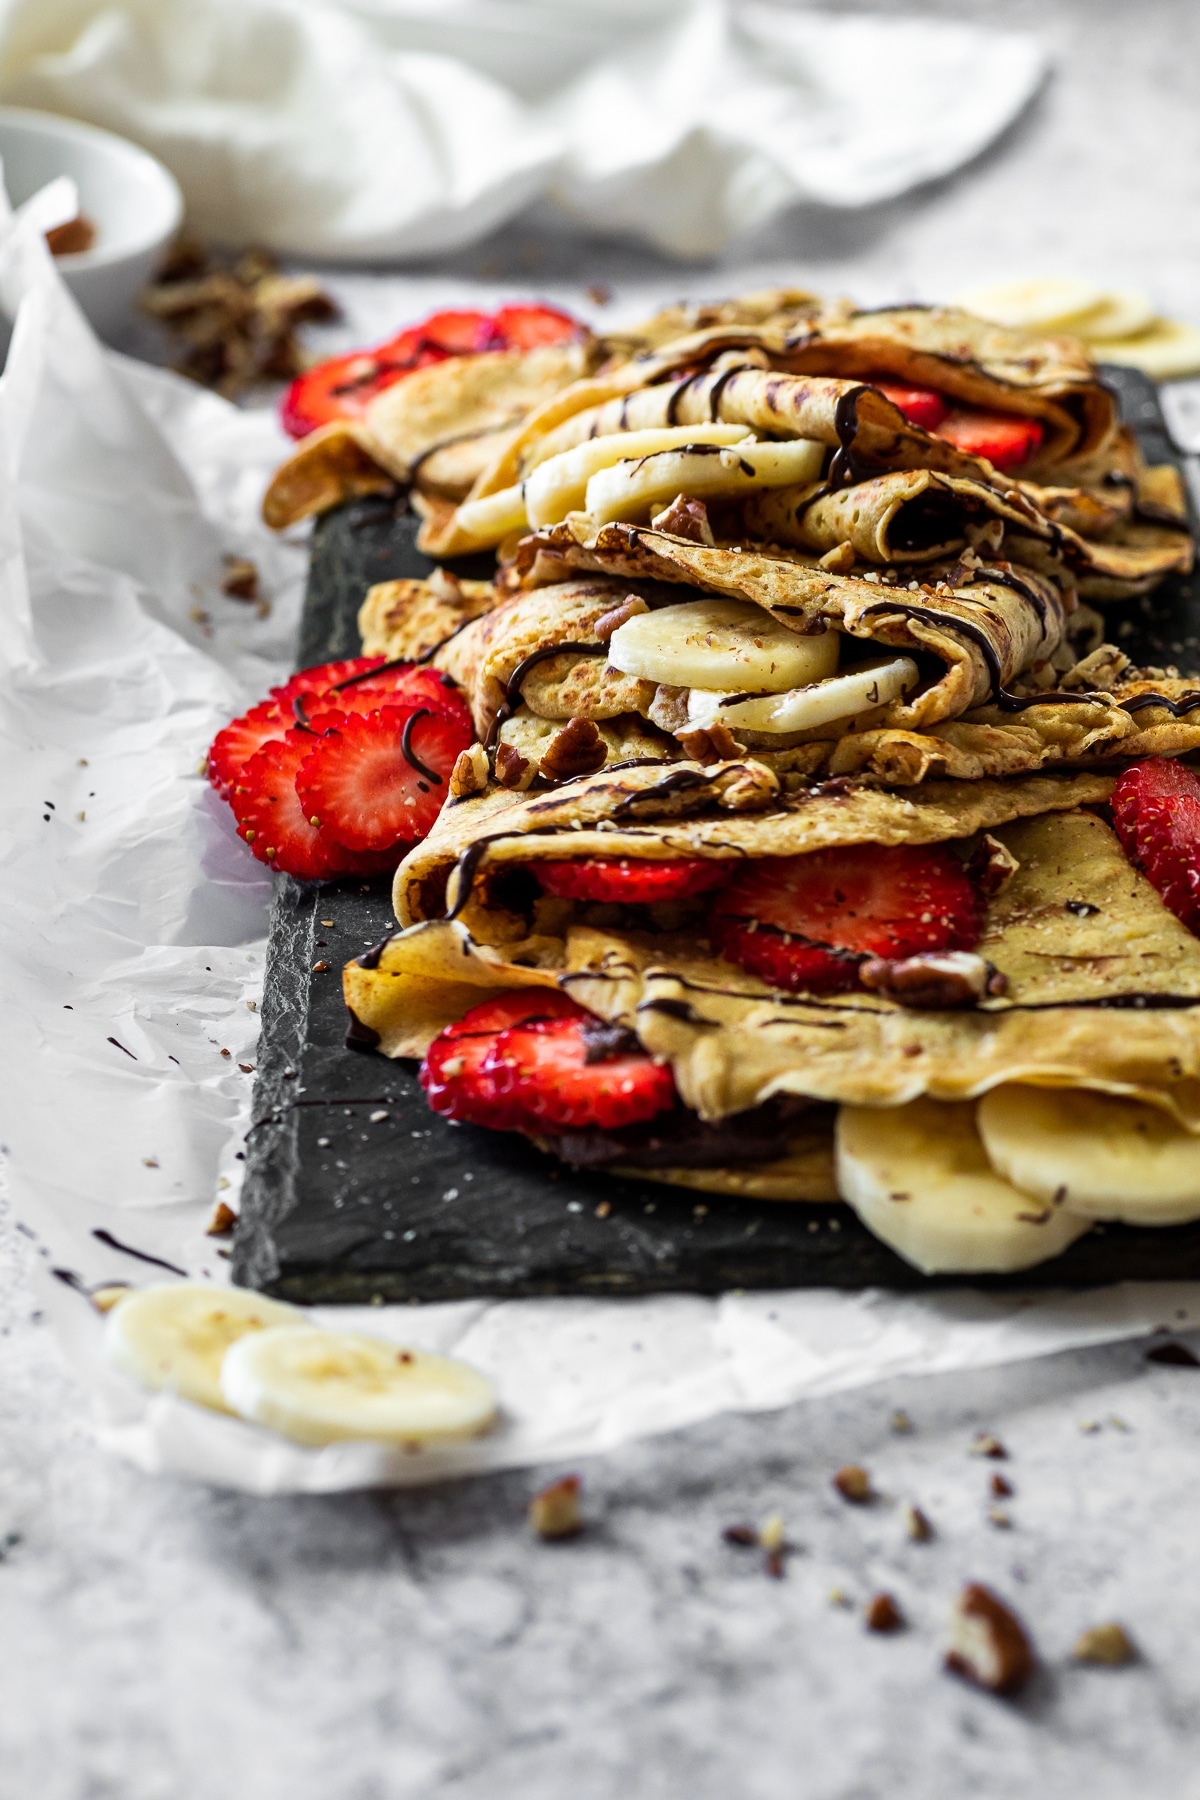 Straight view on the filled crepes with chocolate hummus, banana and strawberries